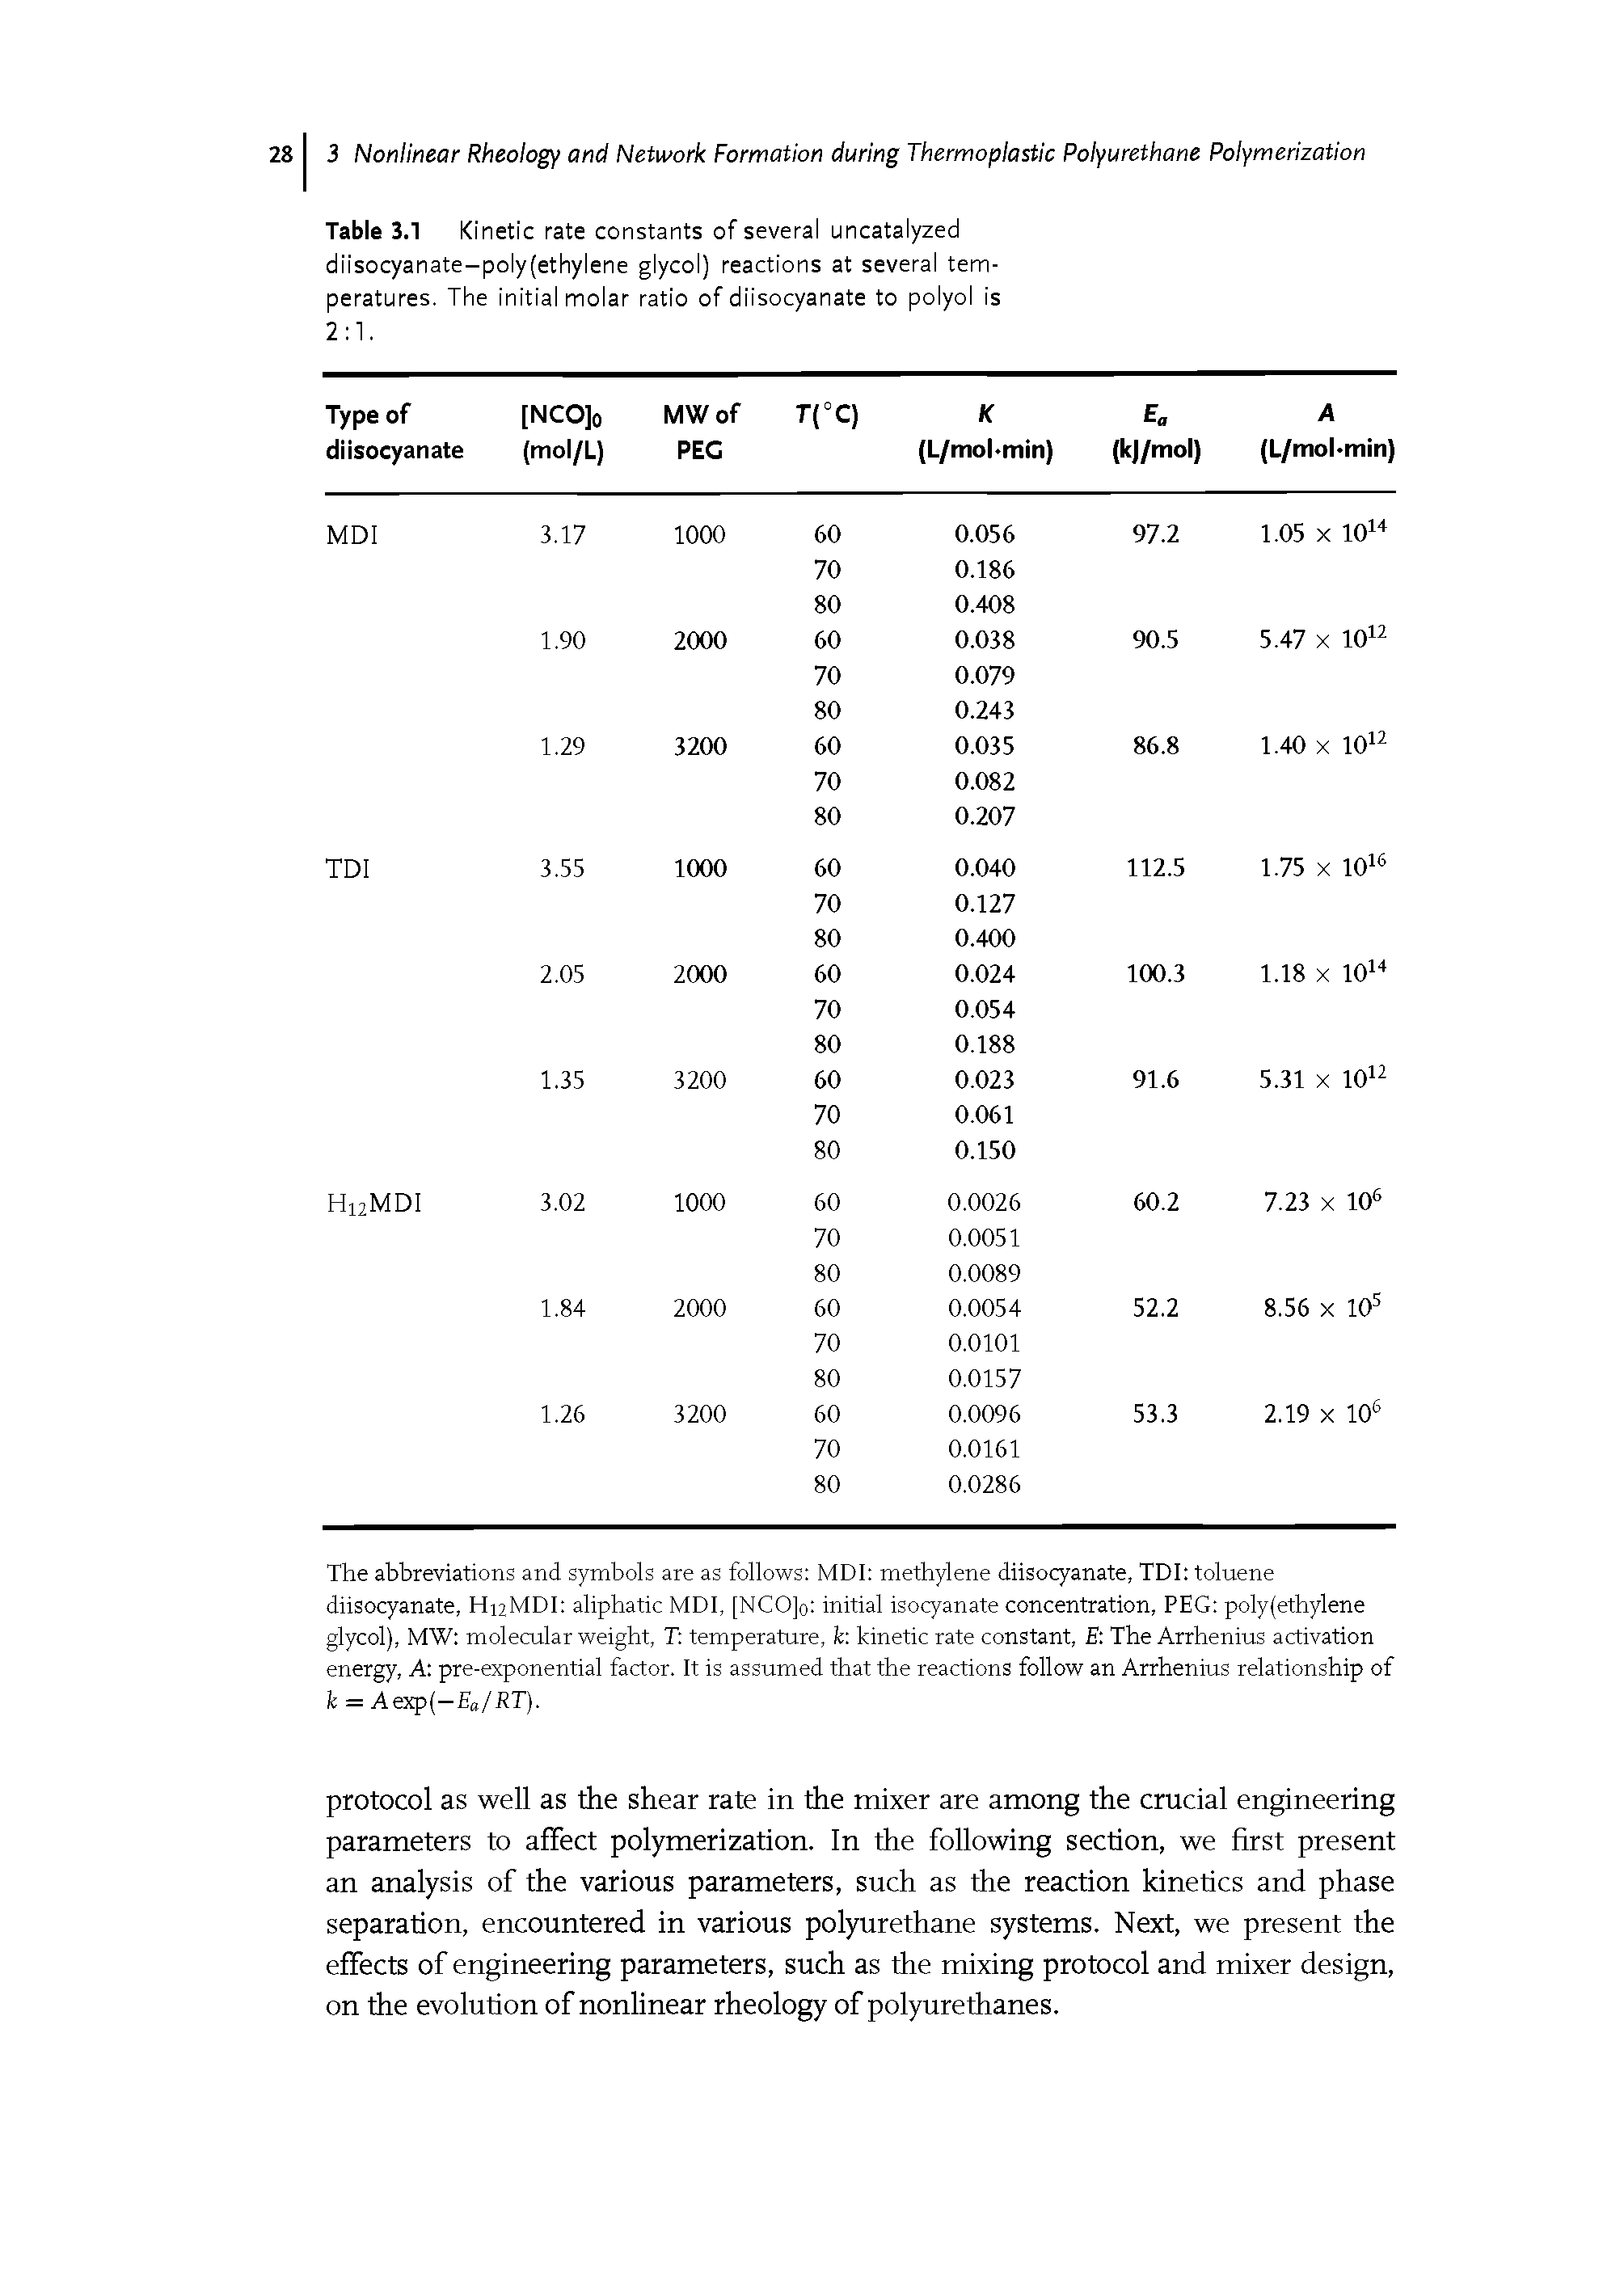 Table 3.1 Kinetic rate constants of several uncatalyzed diisocyanate-poly(ethylene glycol) reactions at several temperatures. The initial molar ratio of diisocyanate to polyol is 2 1.